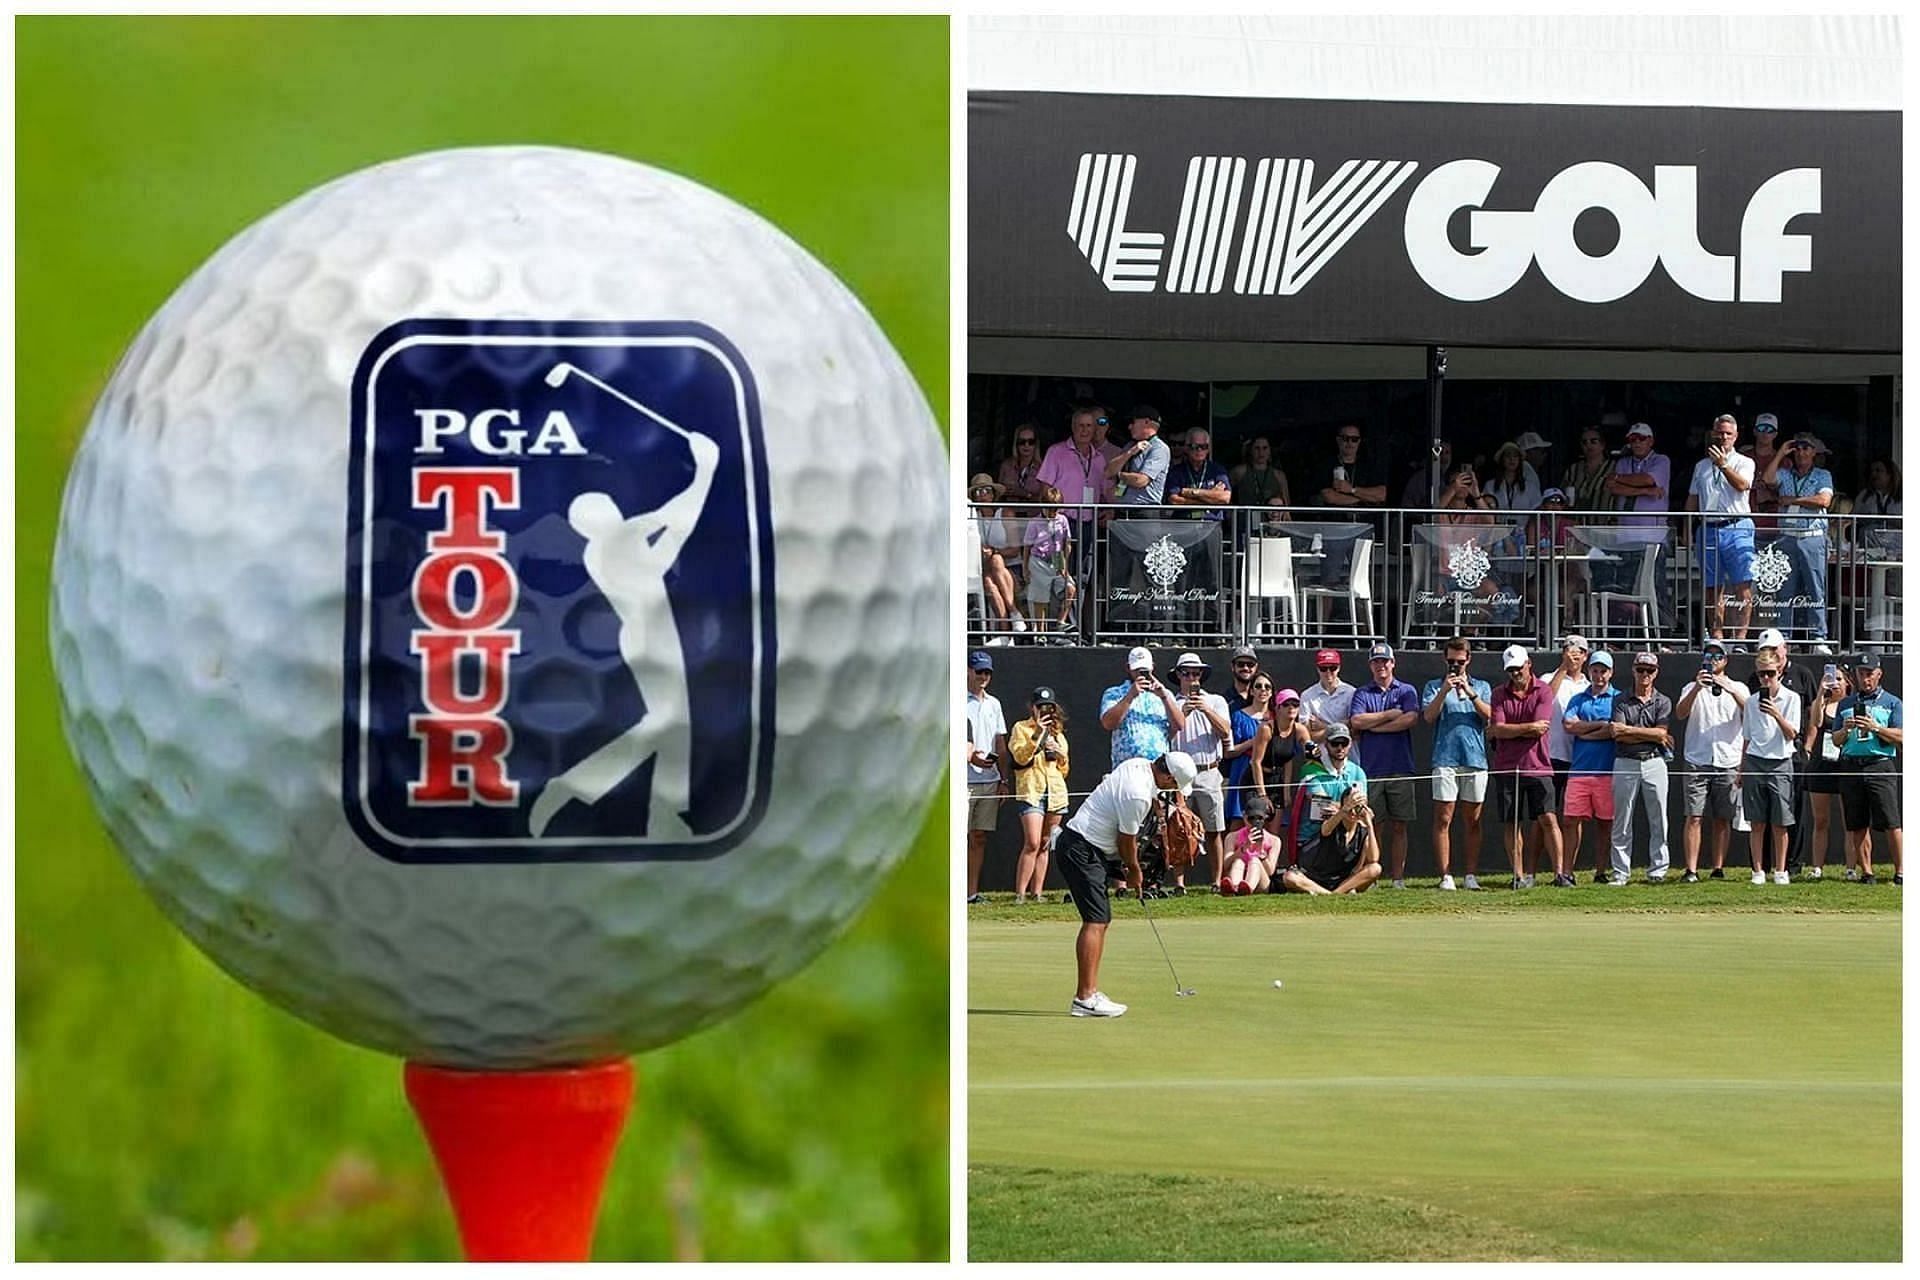 PGA Tour has threatened suspension against its players on participating in liv golf promotions